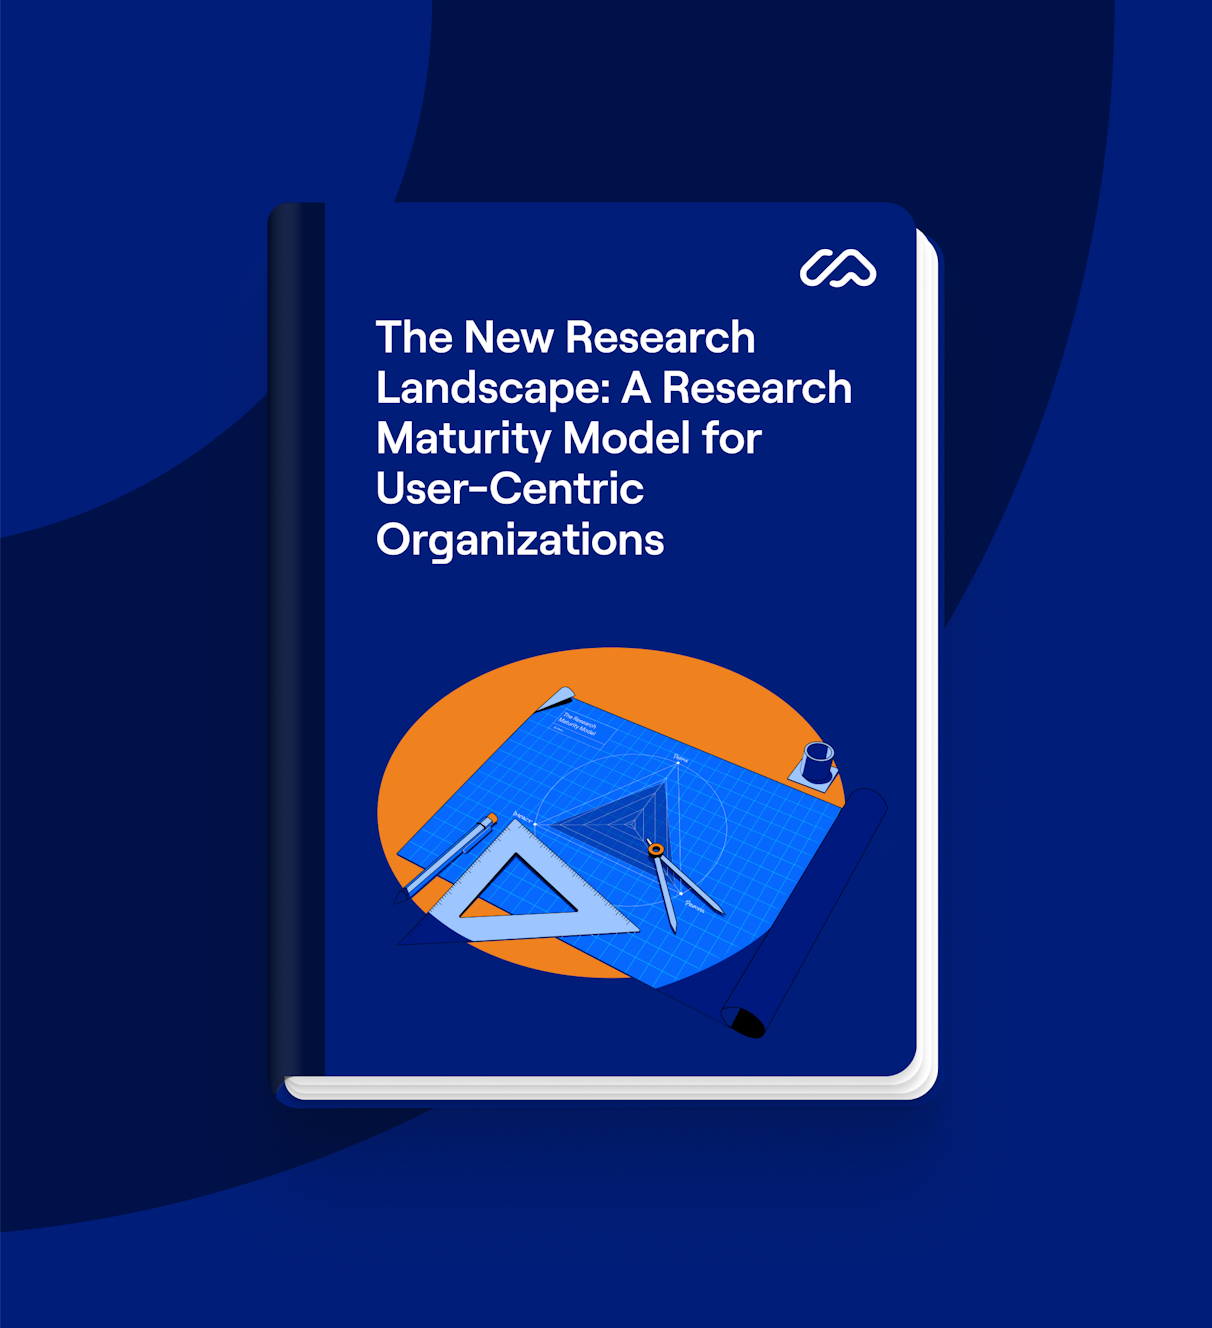 The New Research Landscape: A Research Maturity Model for User-Centric Organizations